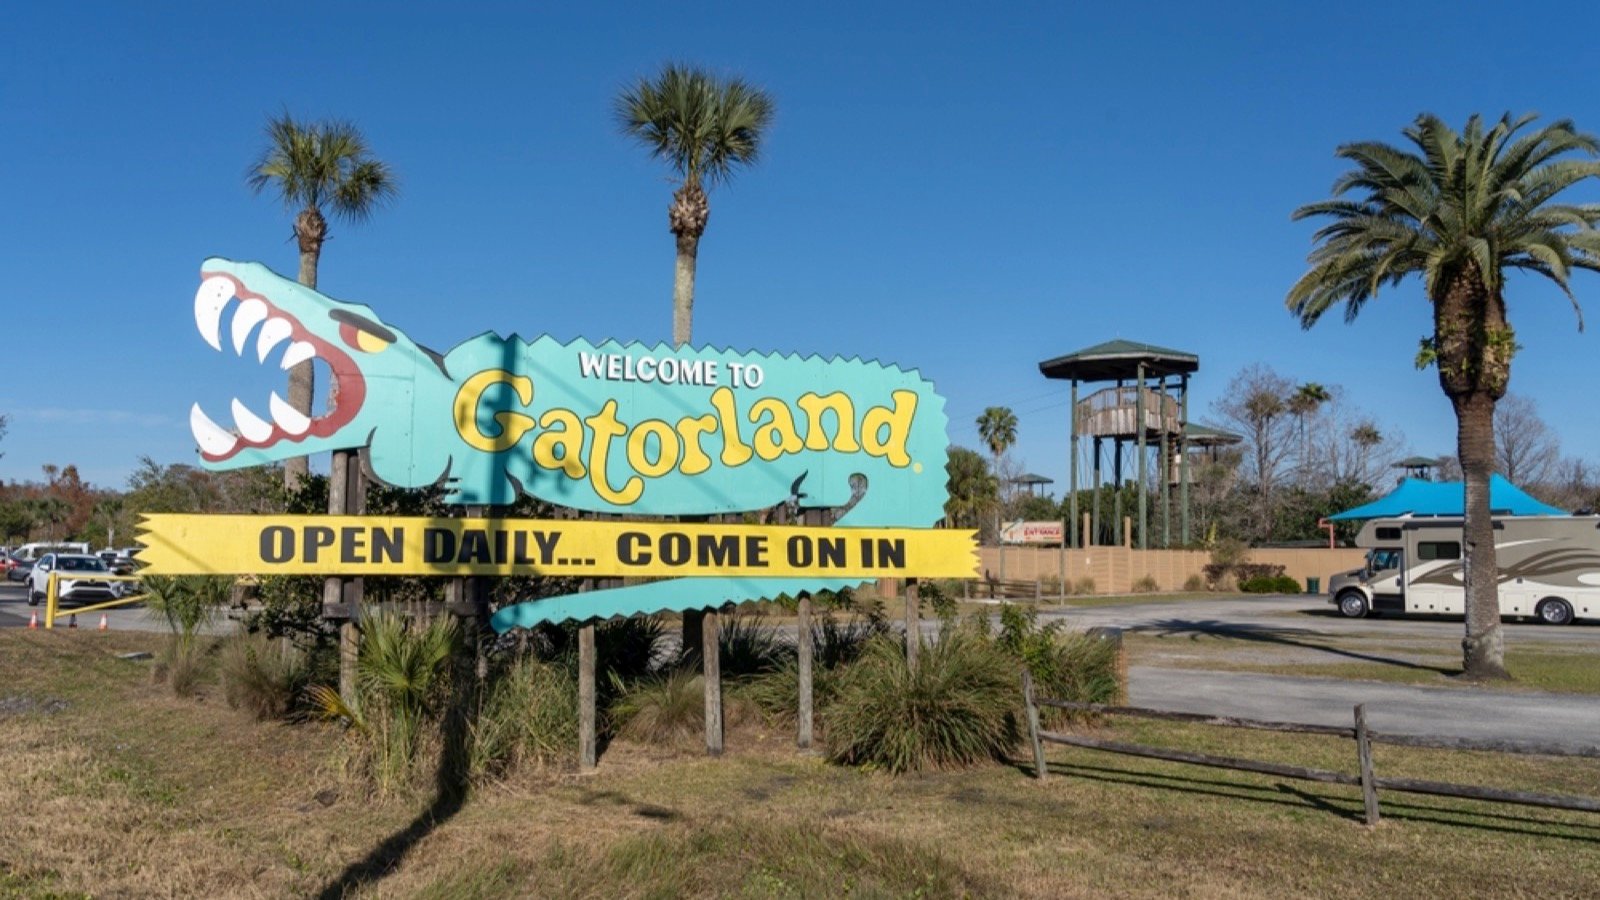 <p>This Orlando park offers a variety of options for families. The 100-acre property has thousands of alligators and crocodiles, petting zoos, ziplines, and a swamp buggy ride. The center might be the best spot to get up close and personal with these dangerous reptiles.</p>